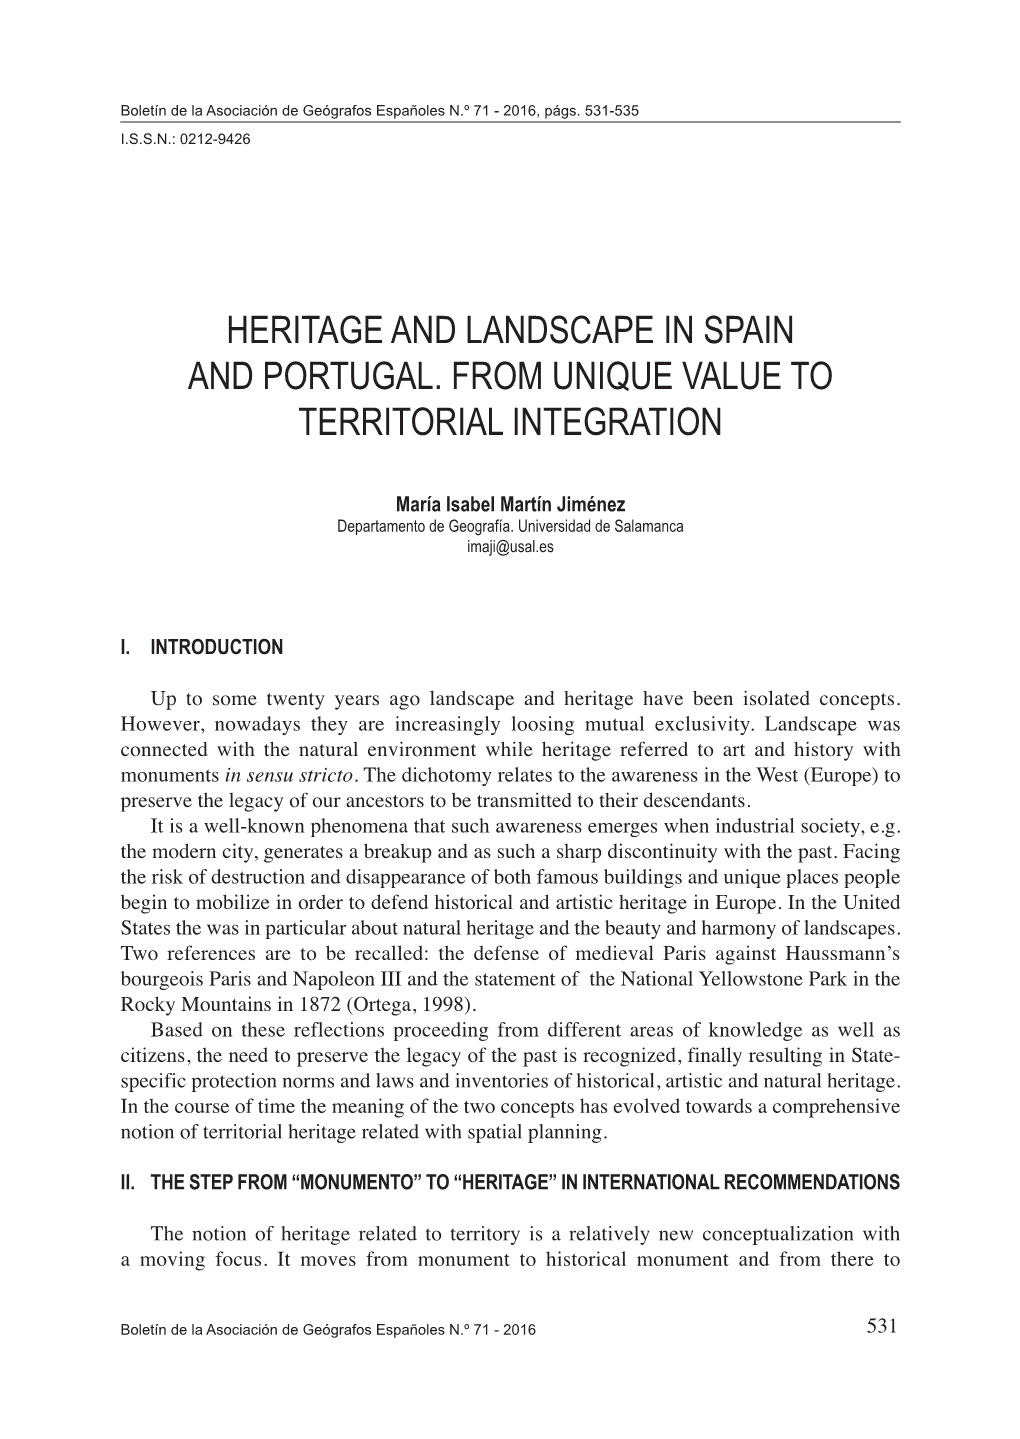 Heritage and Landscape in Spain and Portugal. from Unique Value to Territorial Integration